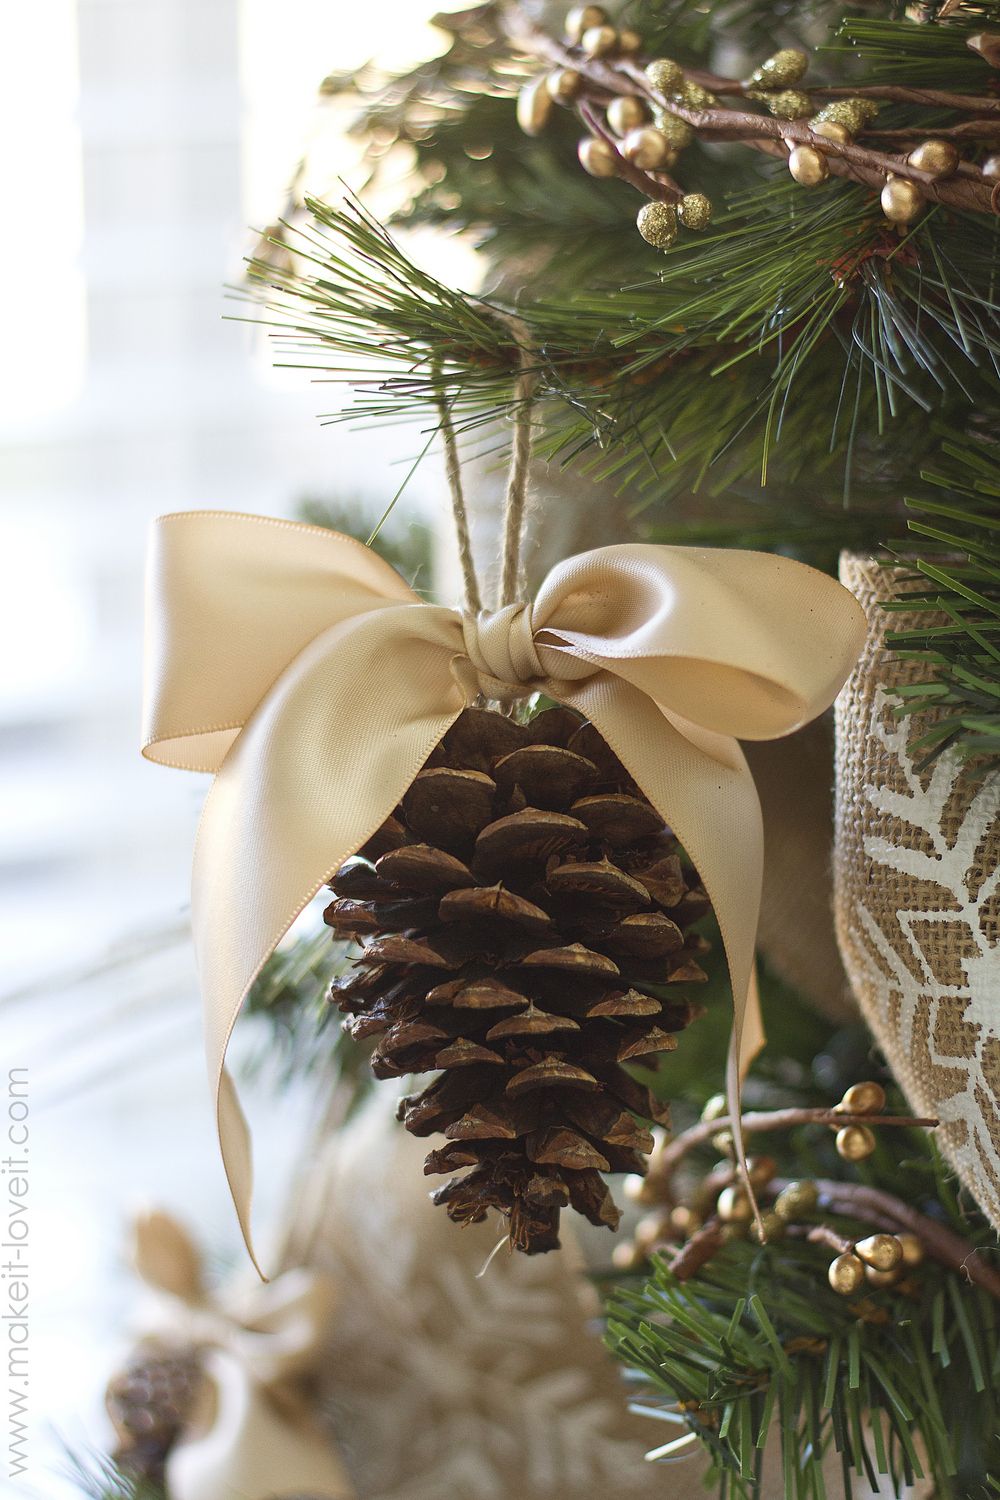 How To Use Pine Cones For Home Decor  Pine Cone Decoration Crafts 